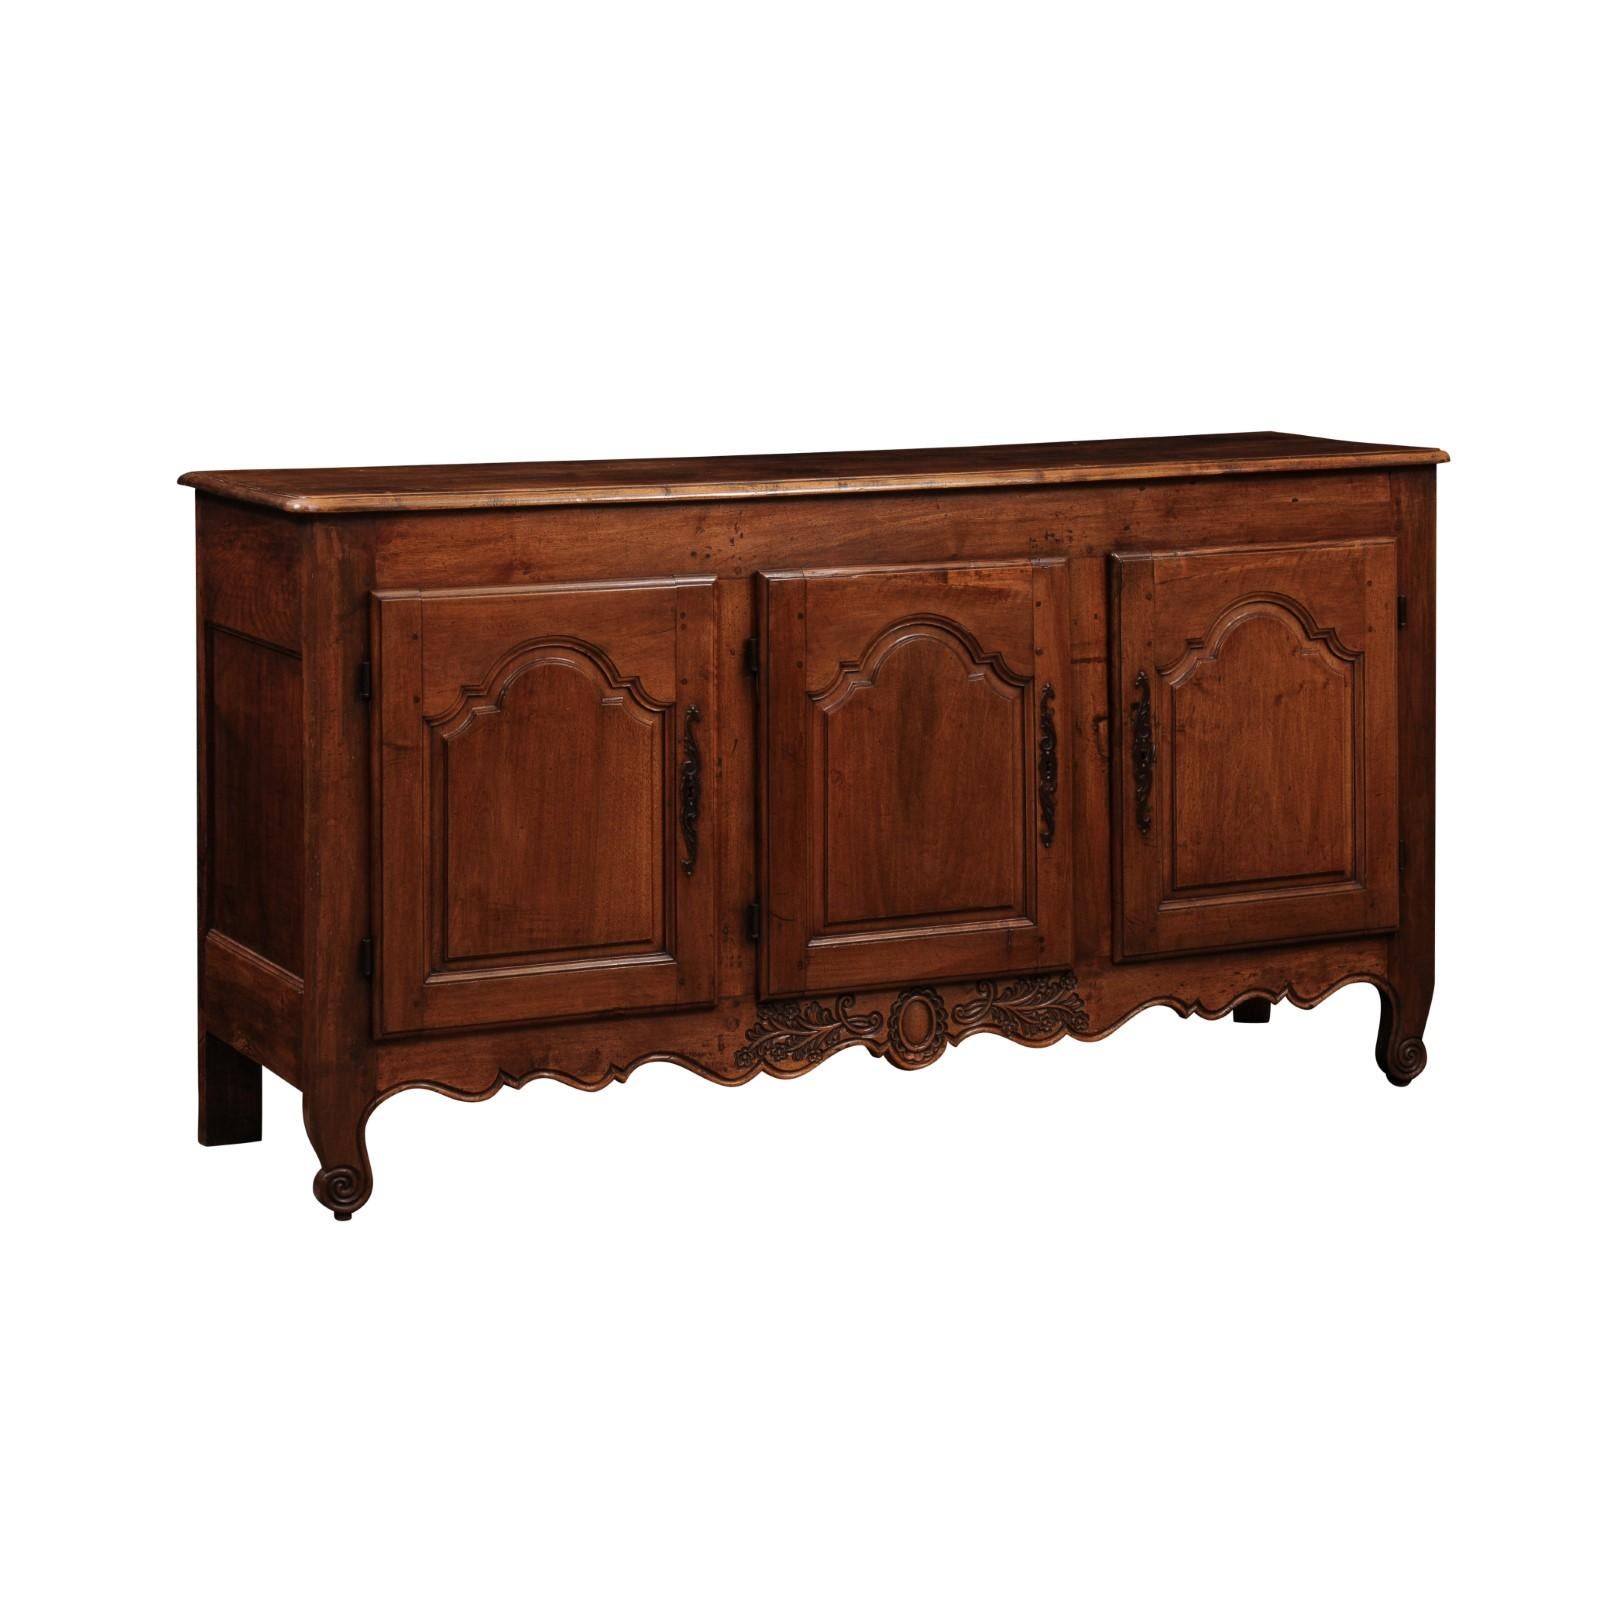 19th Century French Louis XV Style Walnut Enfilade with 3 Cabinet Doors and Carved Apron